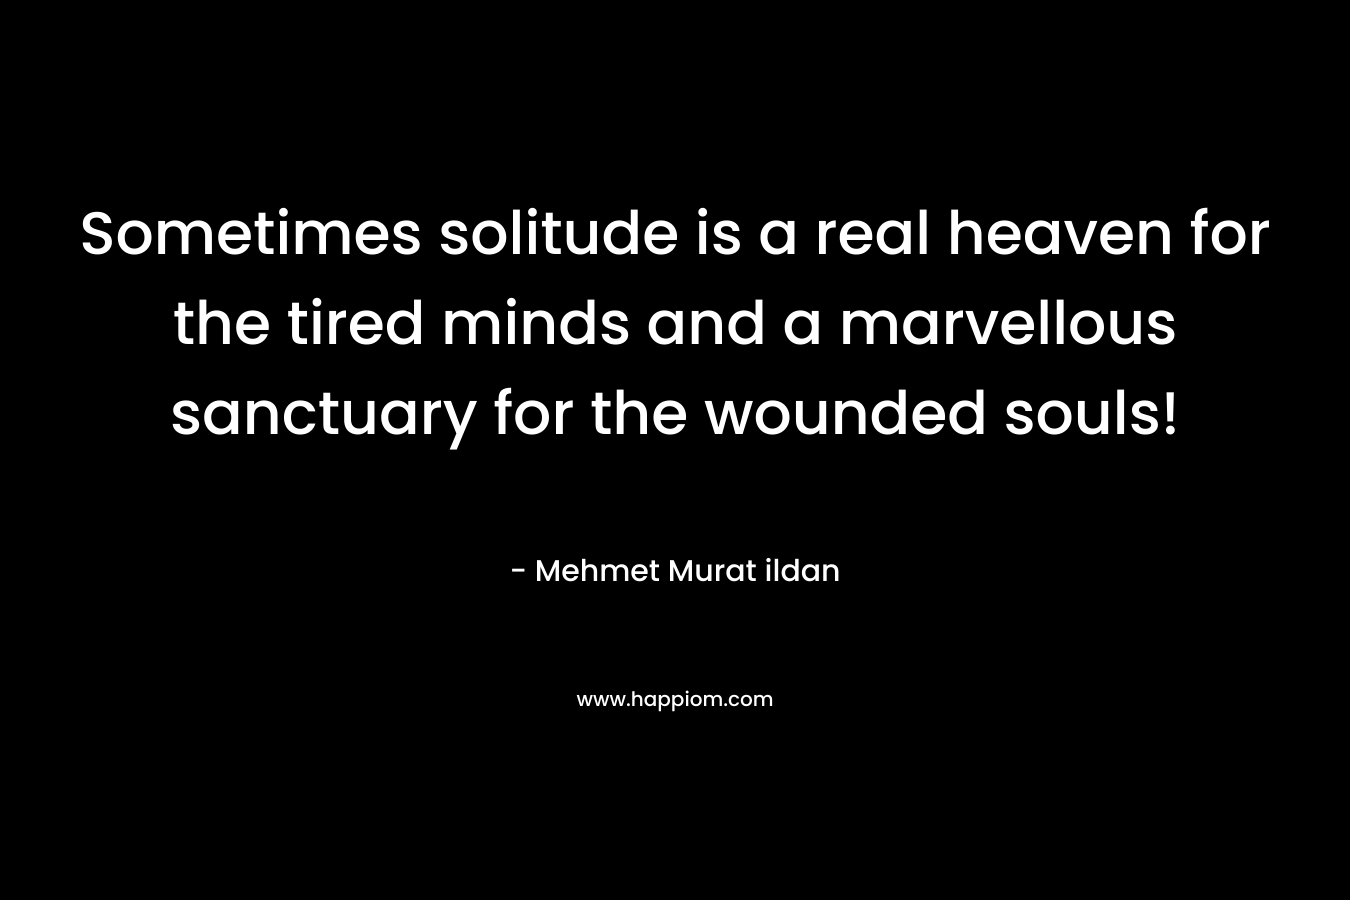 Sometimes solitude is a real heaven for the tired minds and a marvellous sanctuary for the wounded souls! – Mehmet Murat ildan